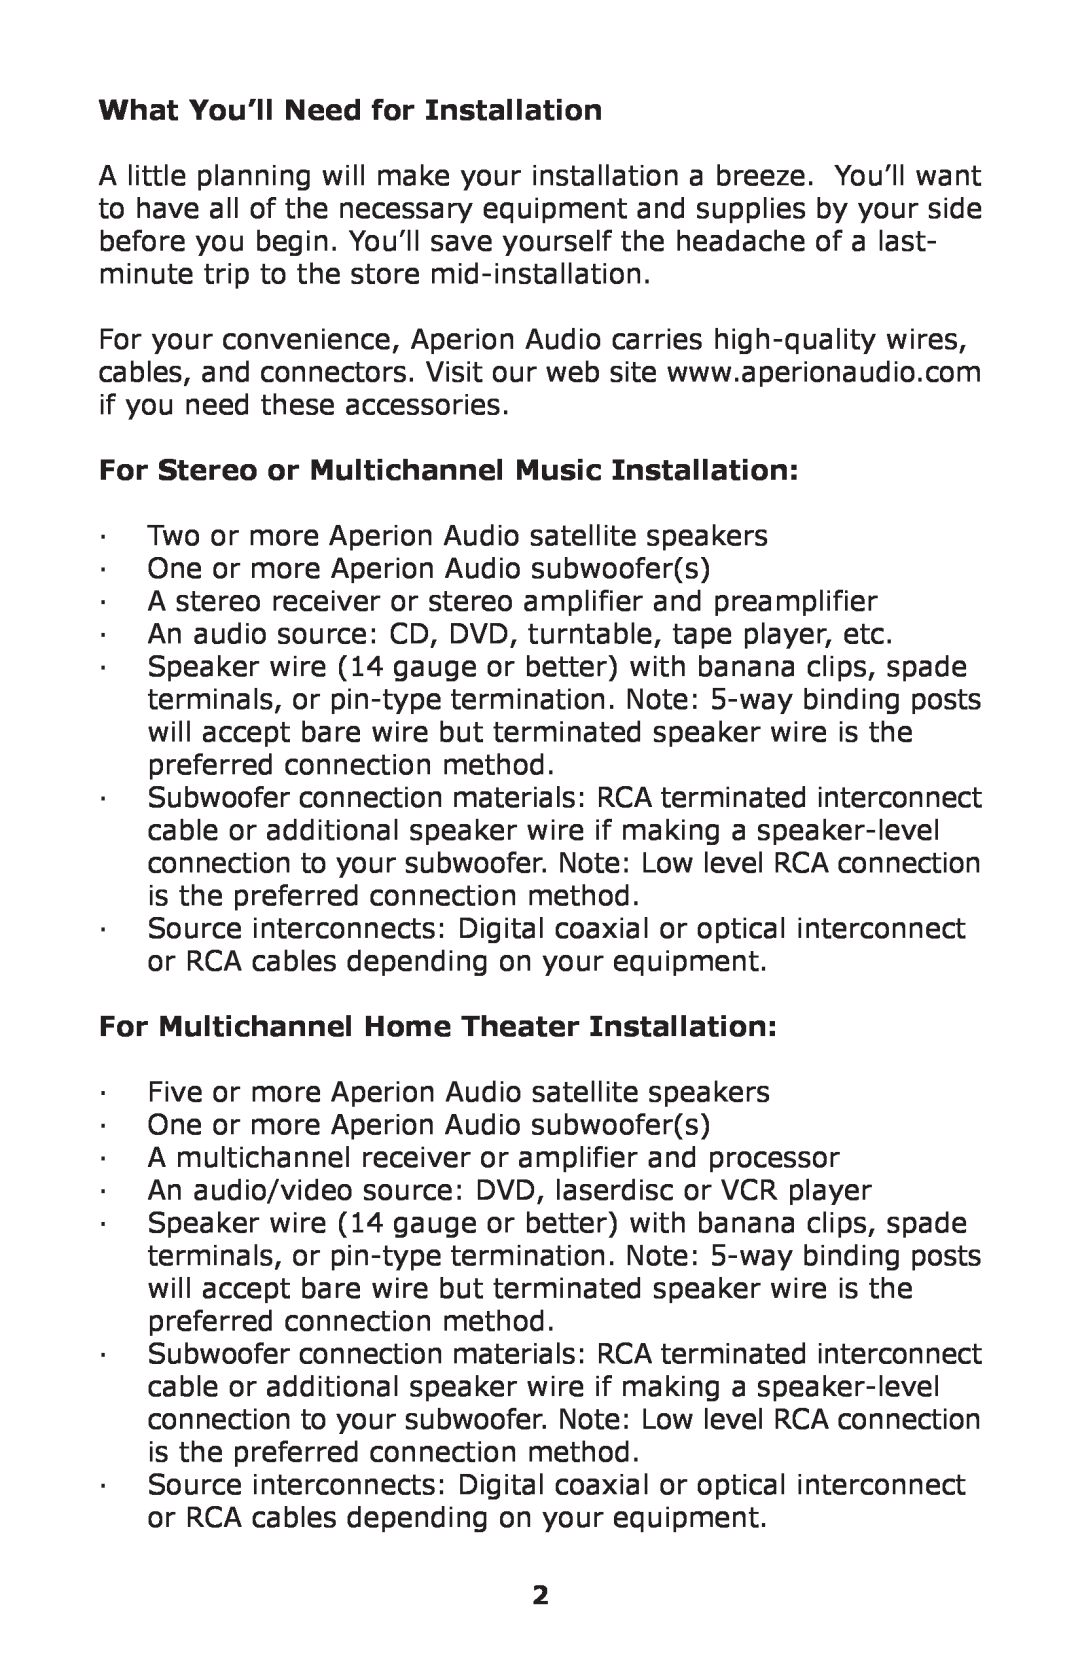 Aperion Audio SW-12, SW8-APR owner manual What You’ll Need for Installation, For Stereo or Multichannel Music Installation 